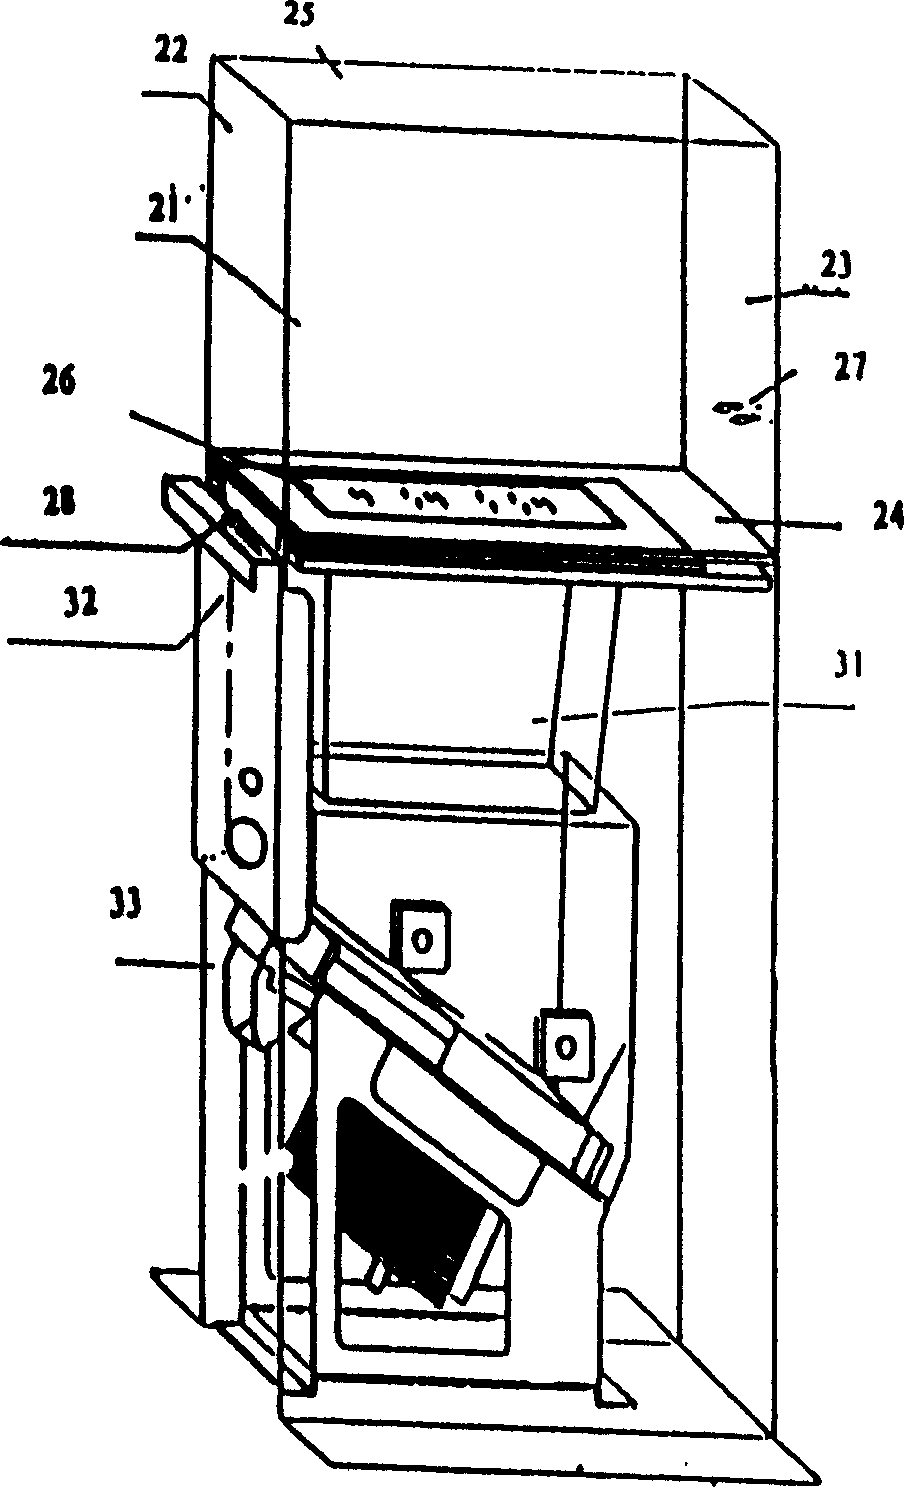 Coin changing device